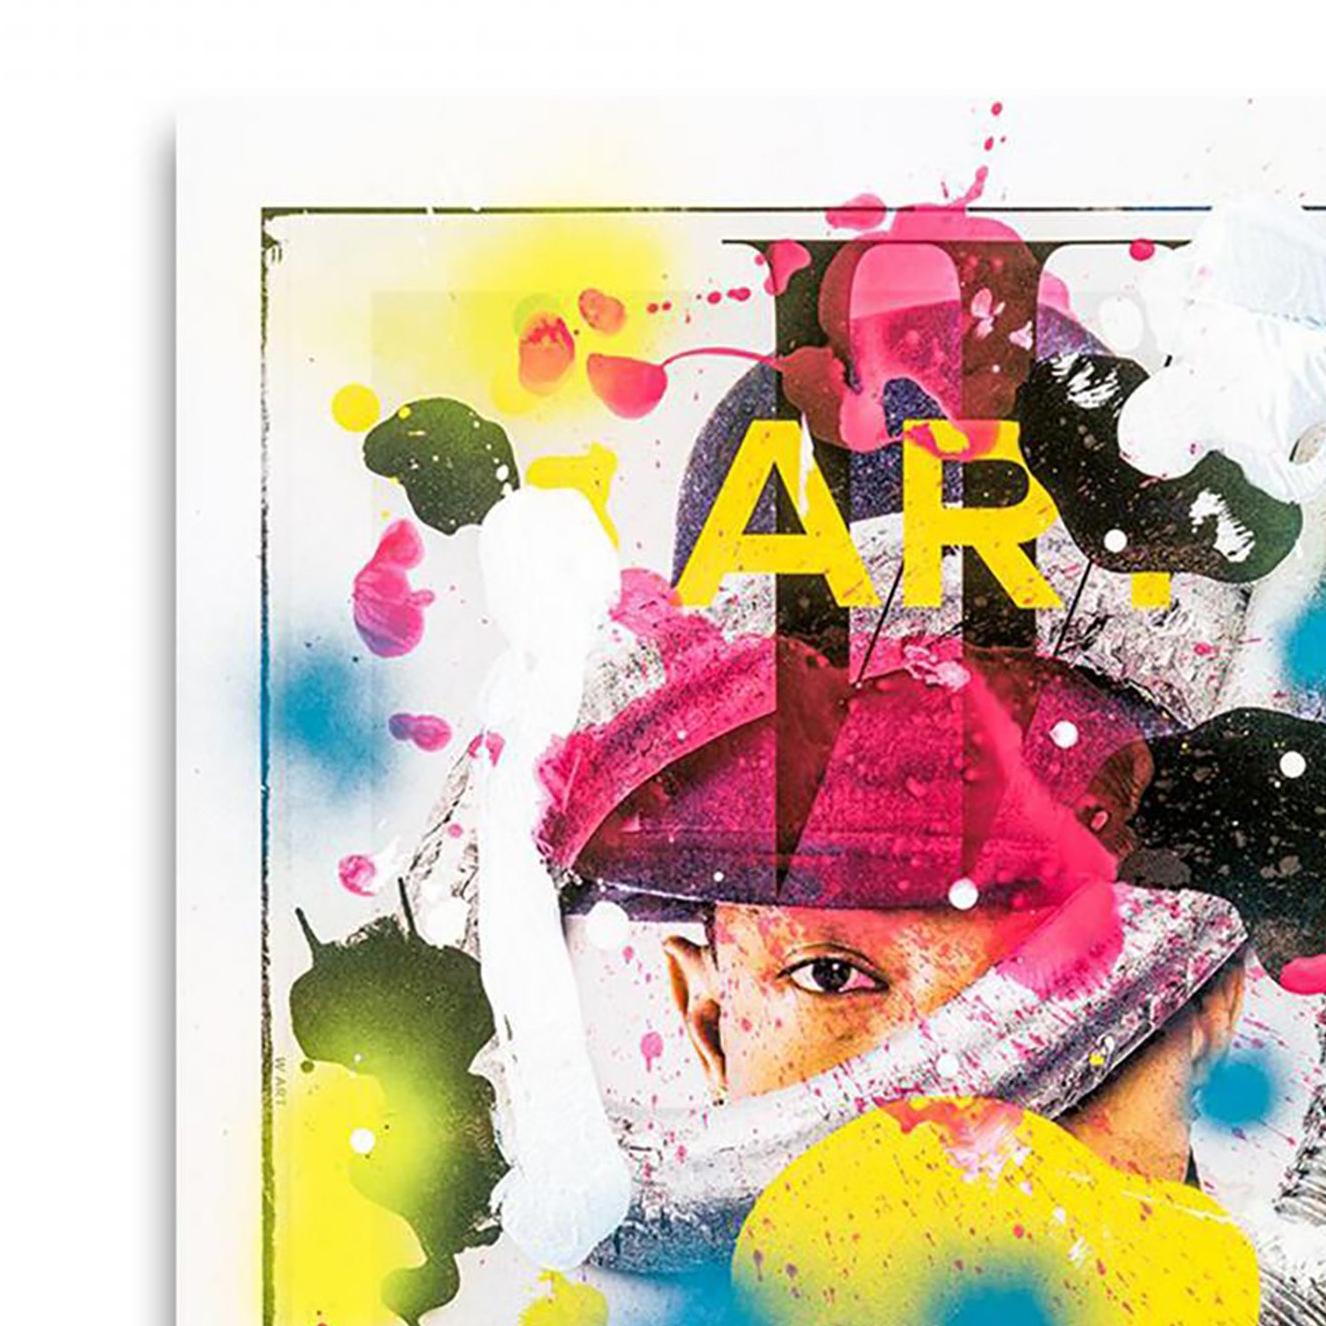 Pharrell by artist Ken Tate is a white, blue, yellow and pink contemporary figurative mixed media piece that measures 30 x 25 and is priced at $1,800.

BIOGRAPHY: 

Louisiana non-figurative artist Ken Tate’s art explores the more emotional aspects